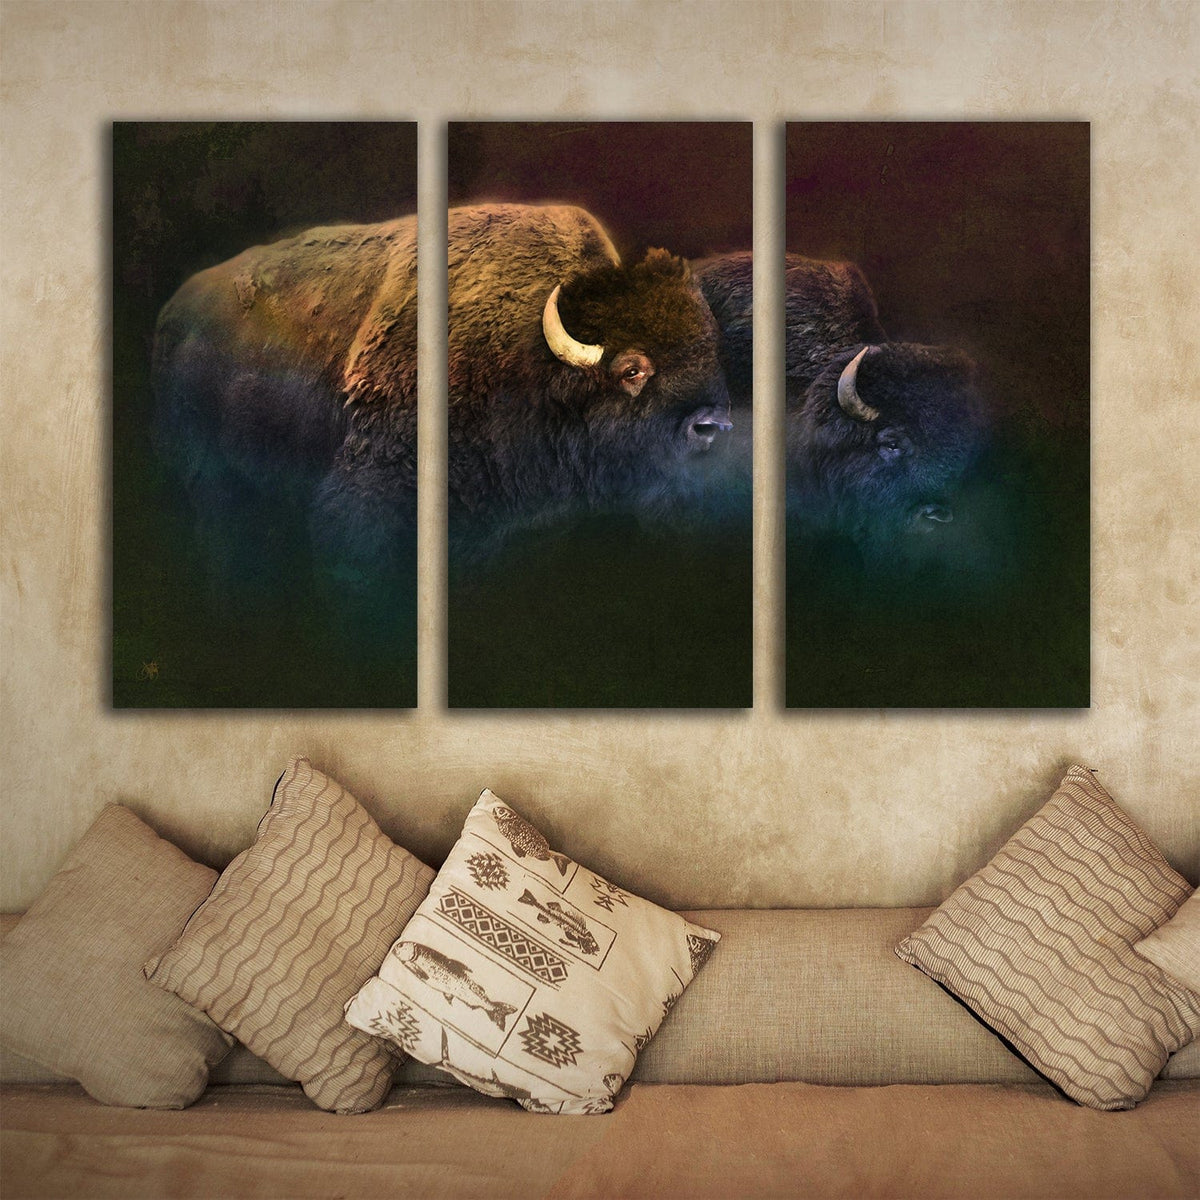 Rustic wildlife decor Bison animal art from Personal Prints